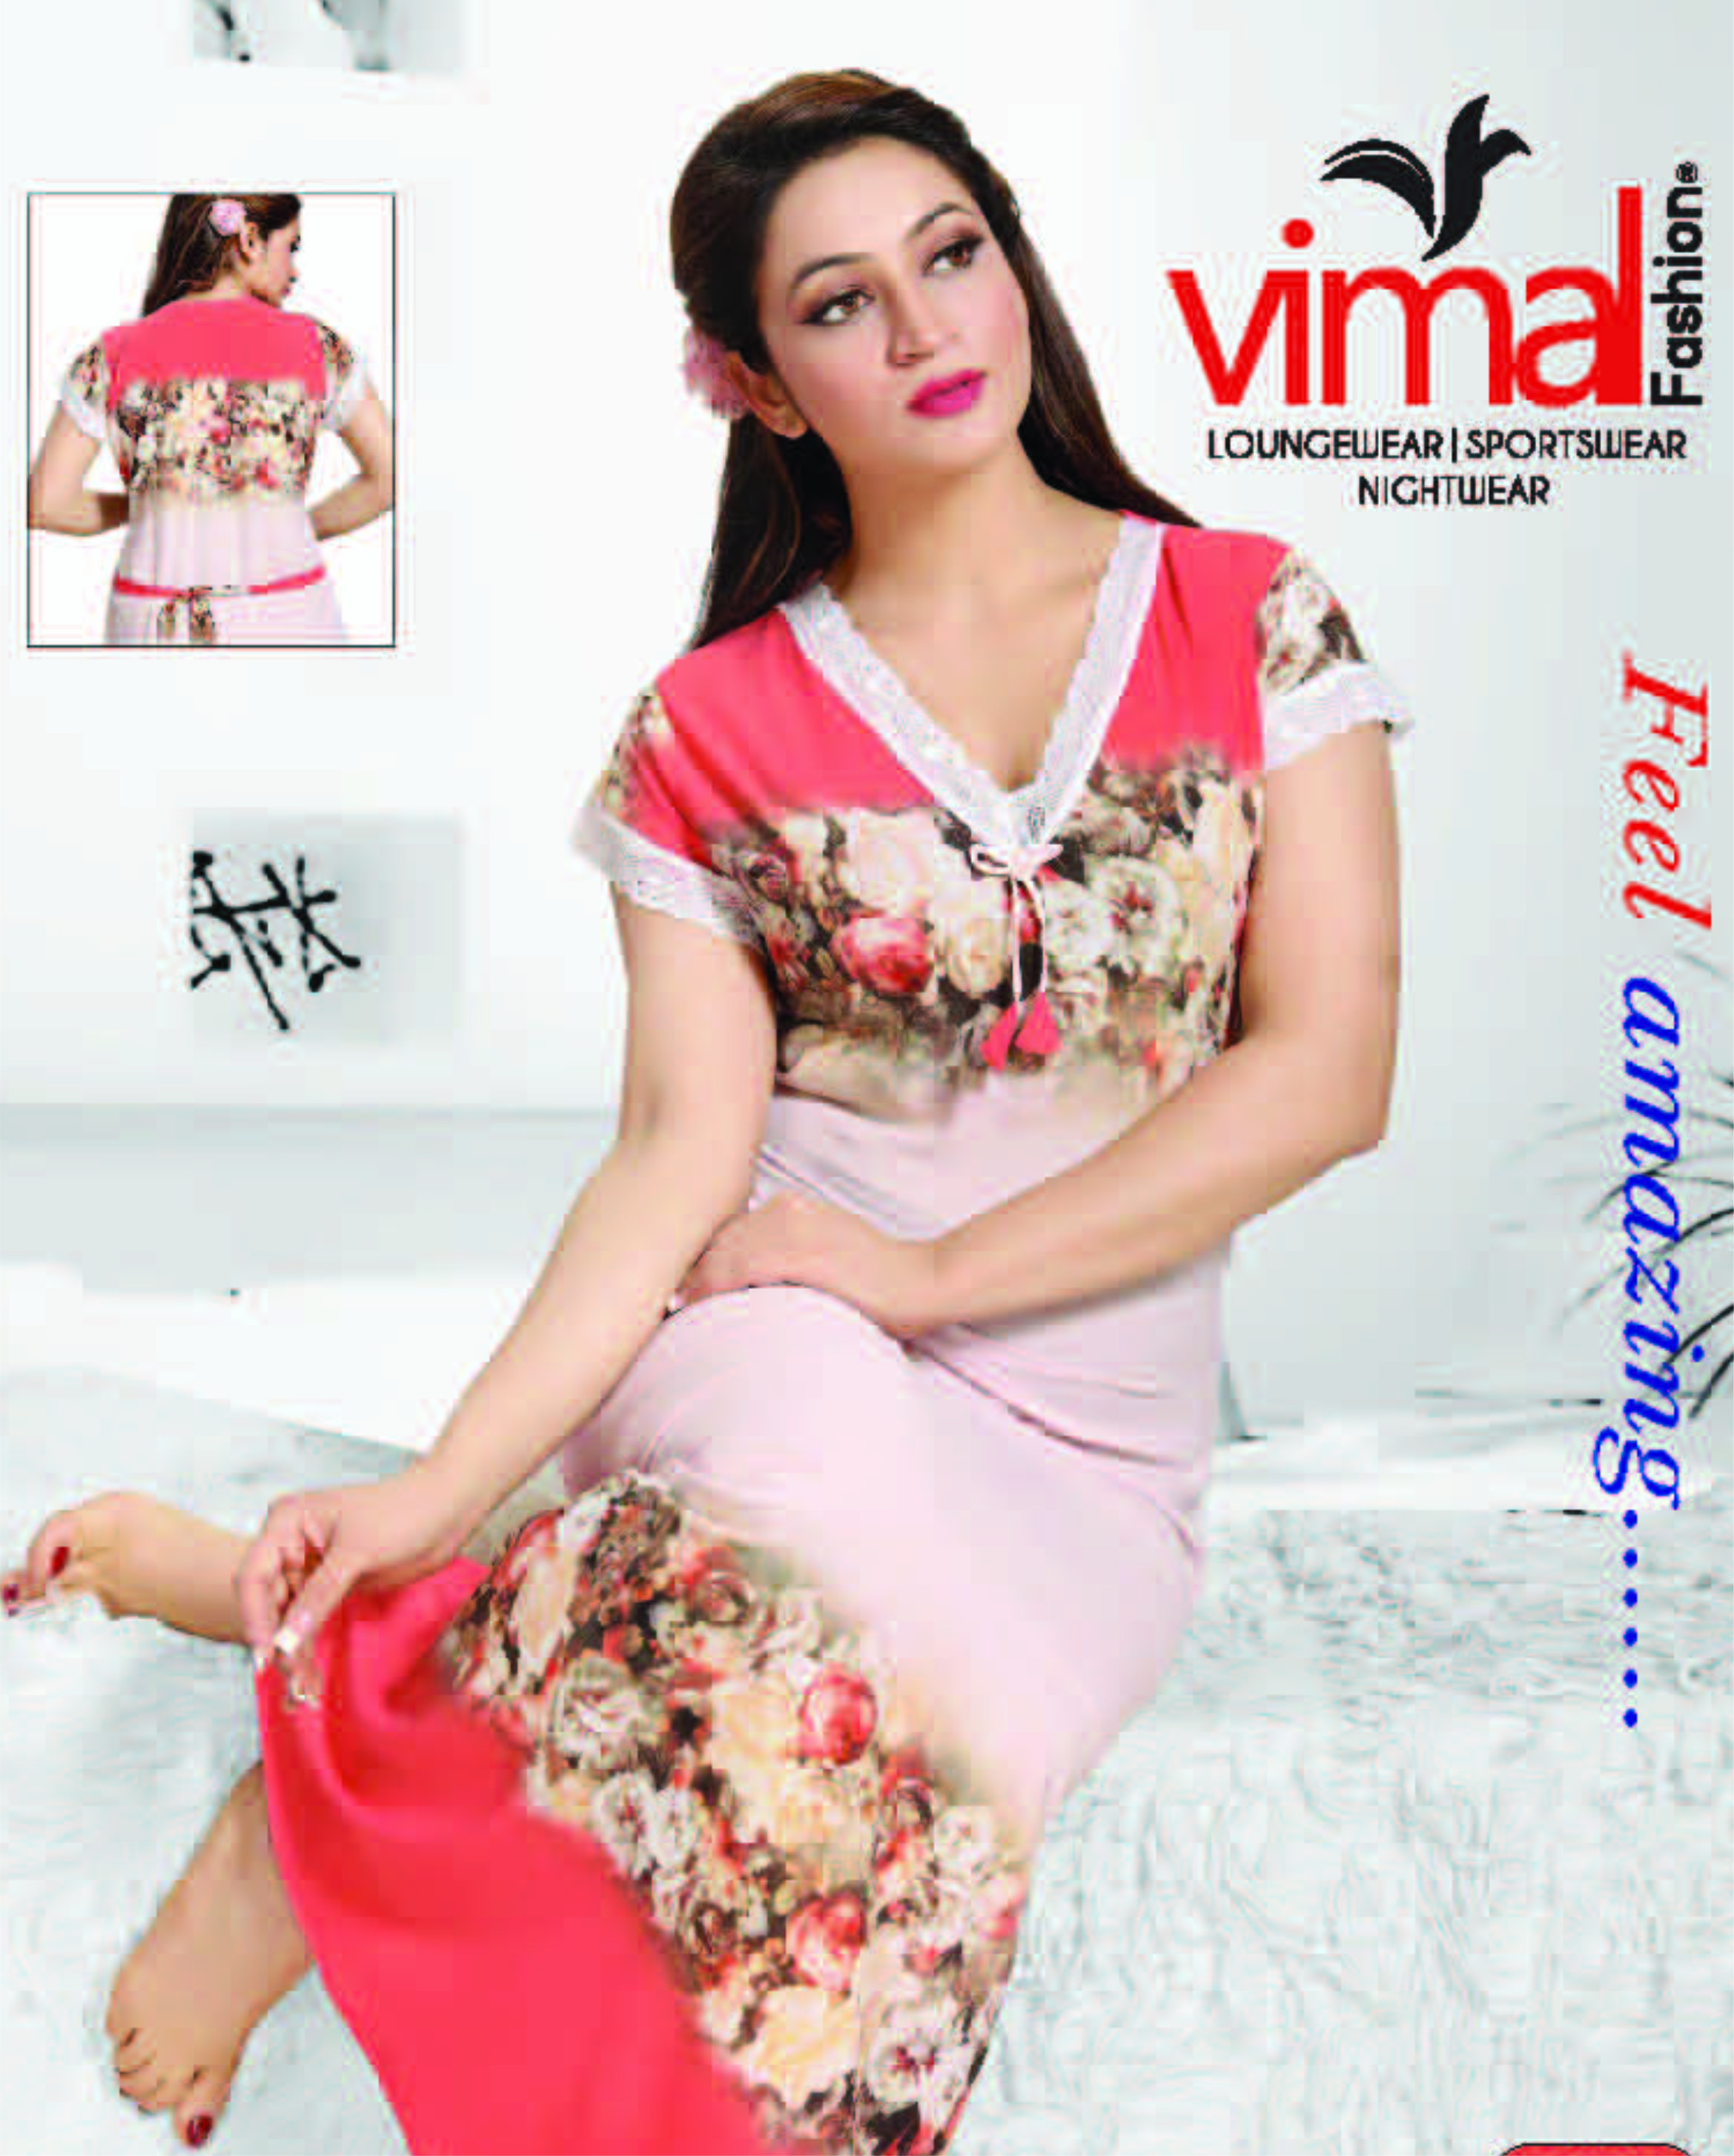 Dazzle your nights with vimal nightwear